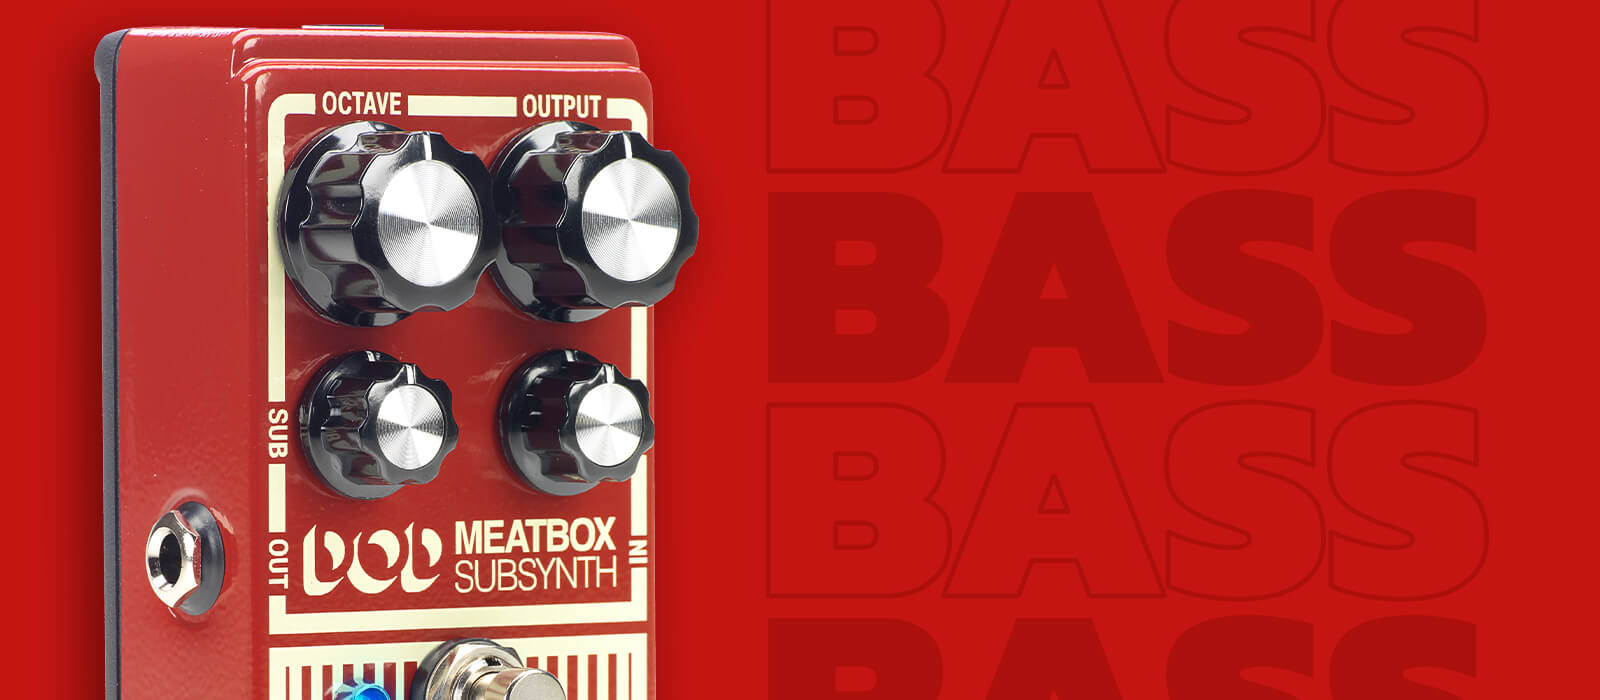 DOD Meatbox distortion guitar pedal on matching red background